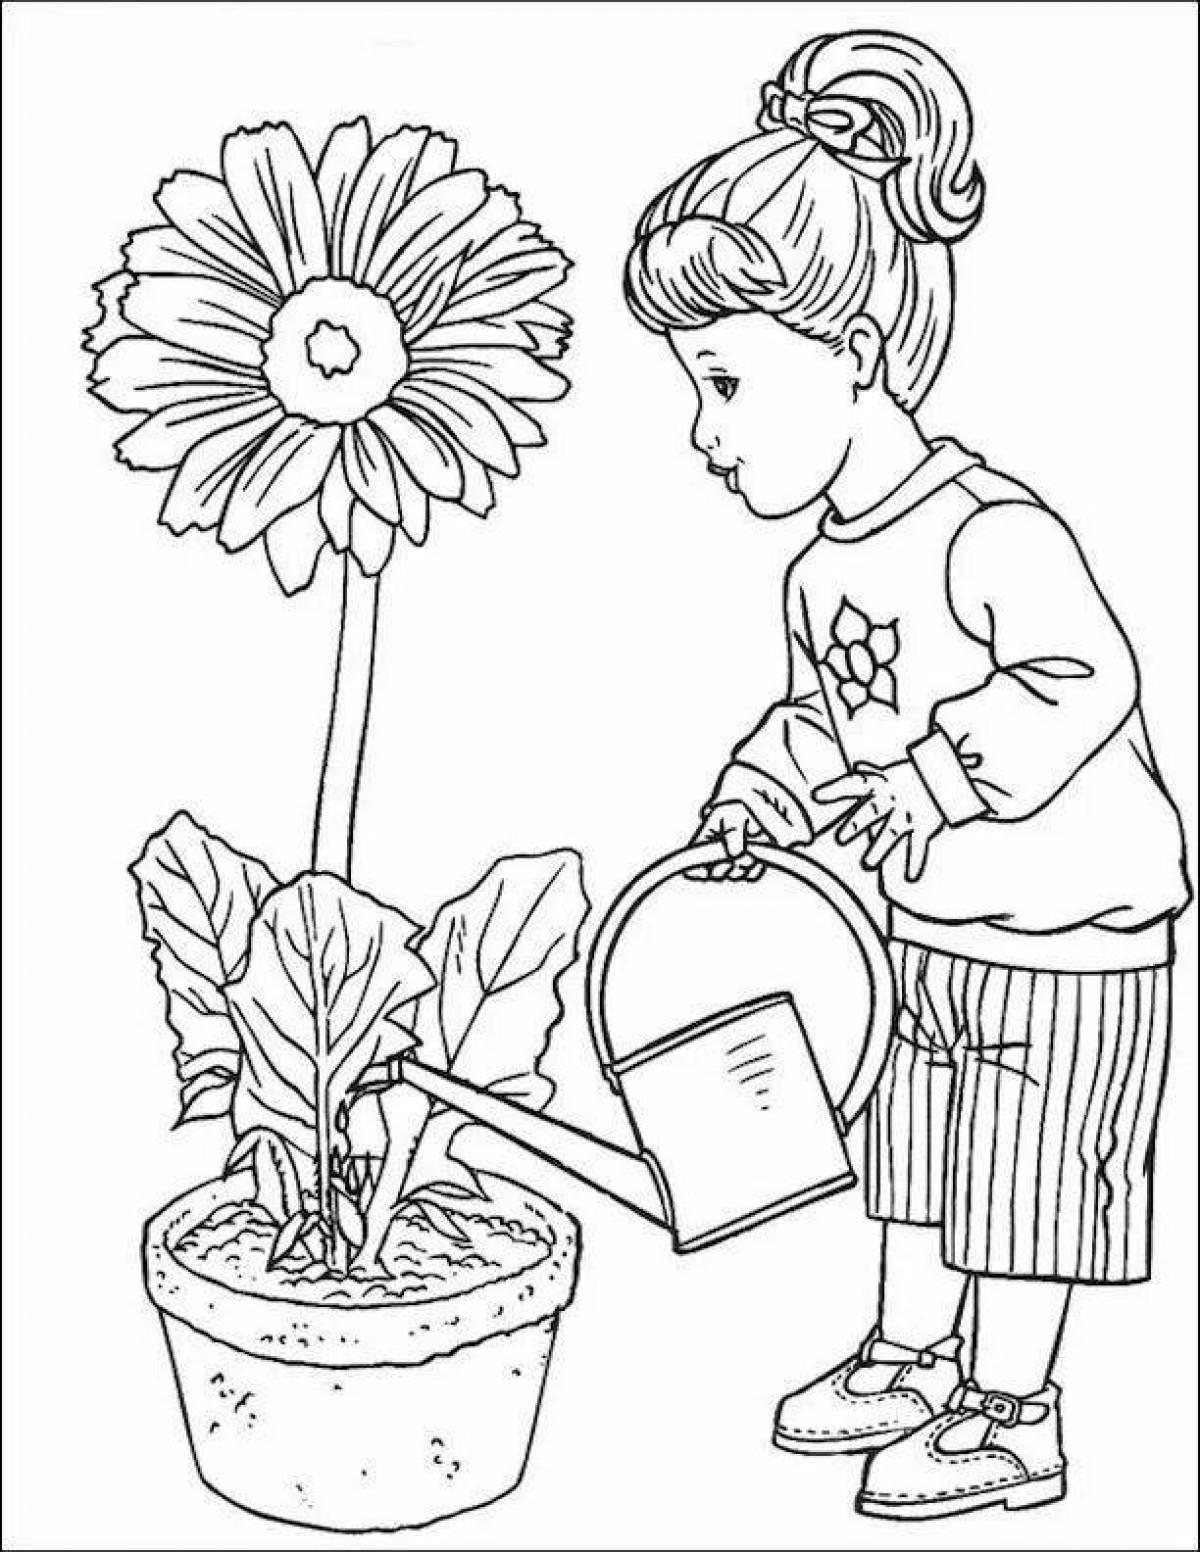 Coloring page attractive houseplant care